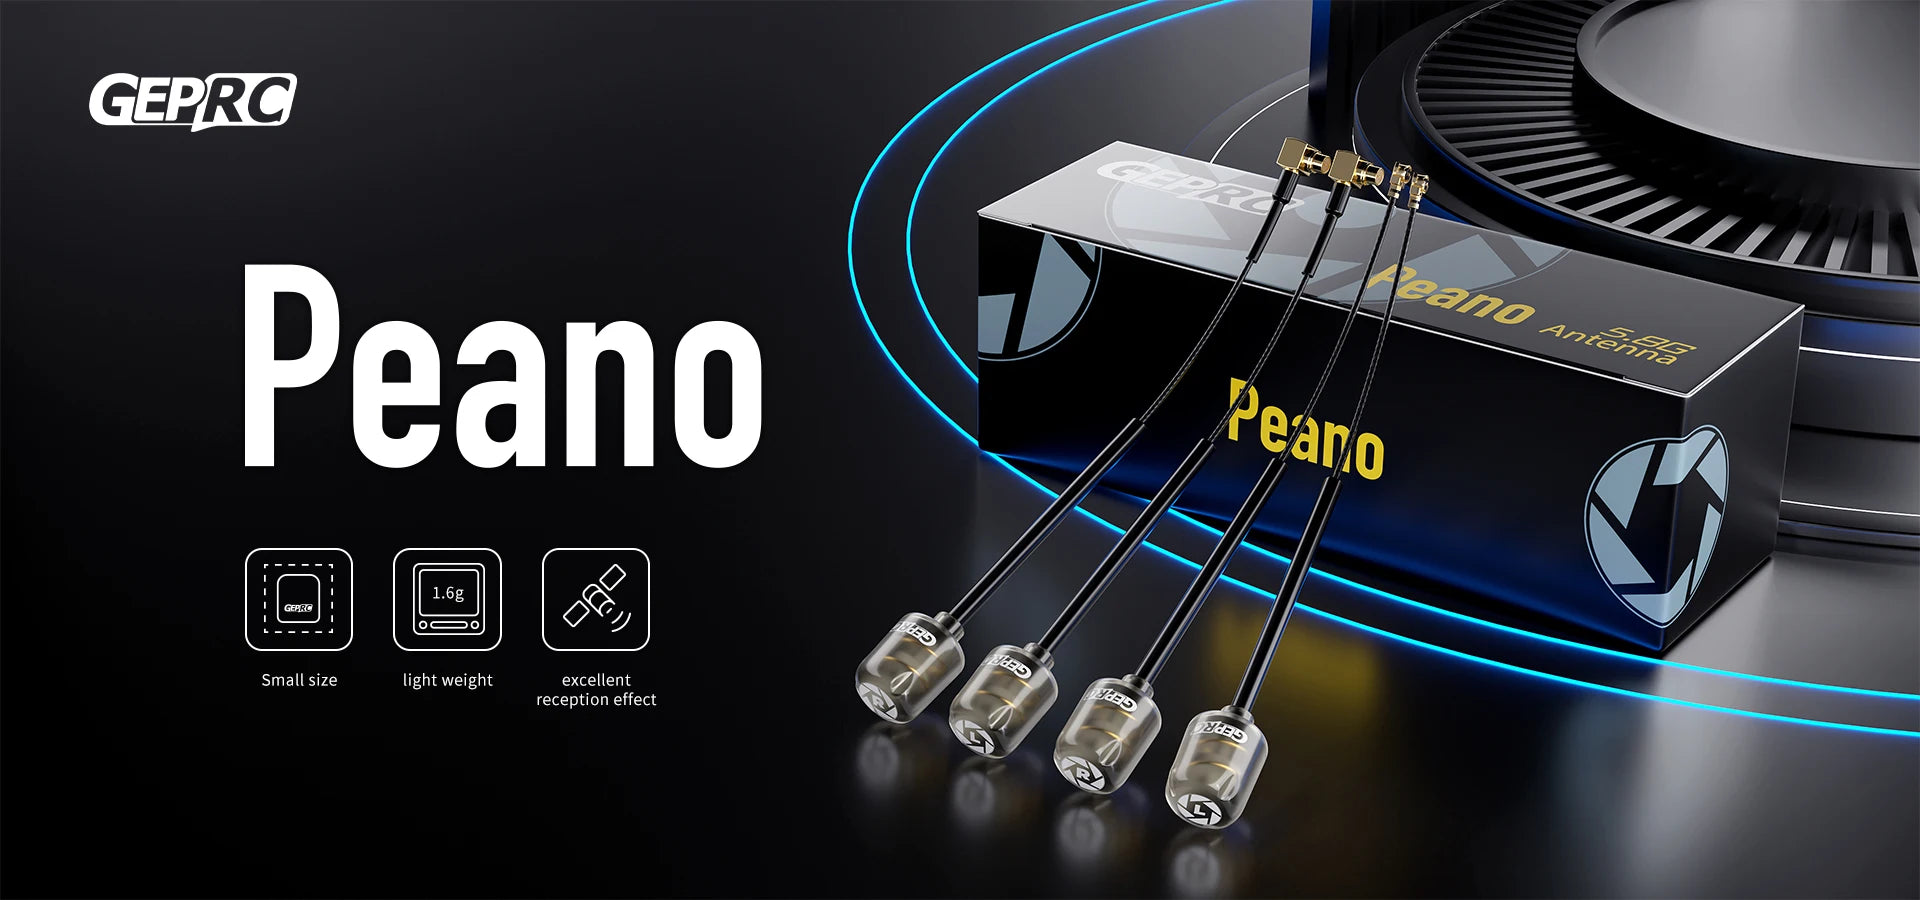 GEPRC Peano 1.6g GerrG Small size light weight excellent reception effect